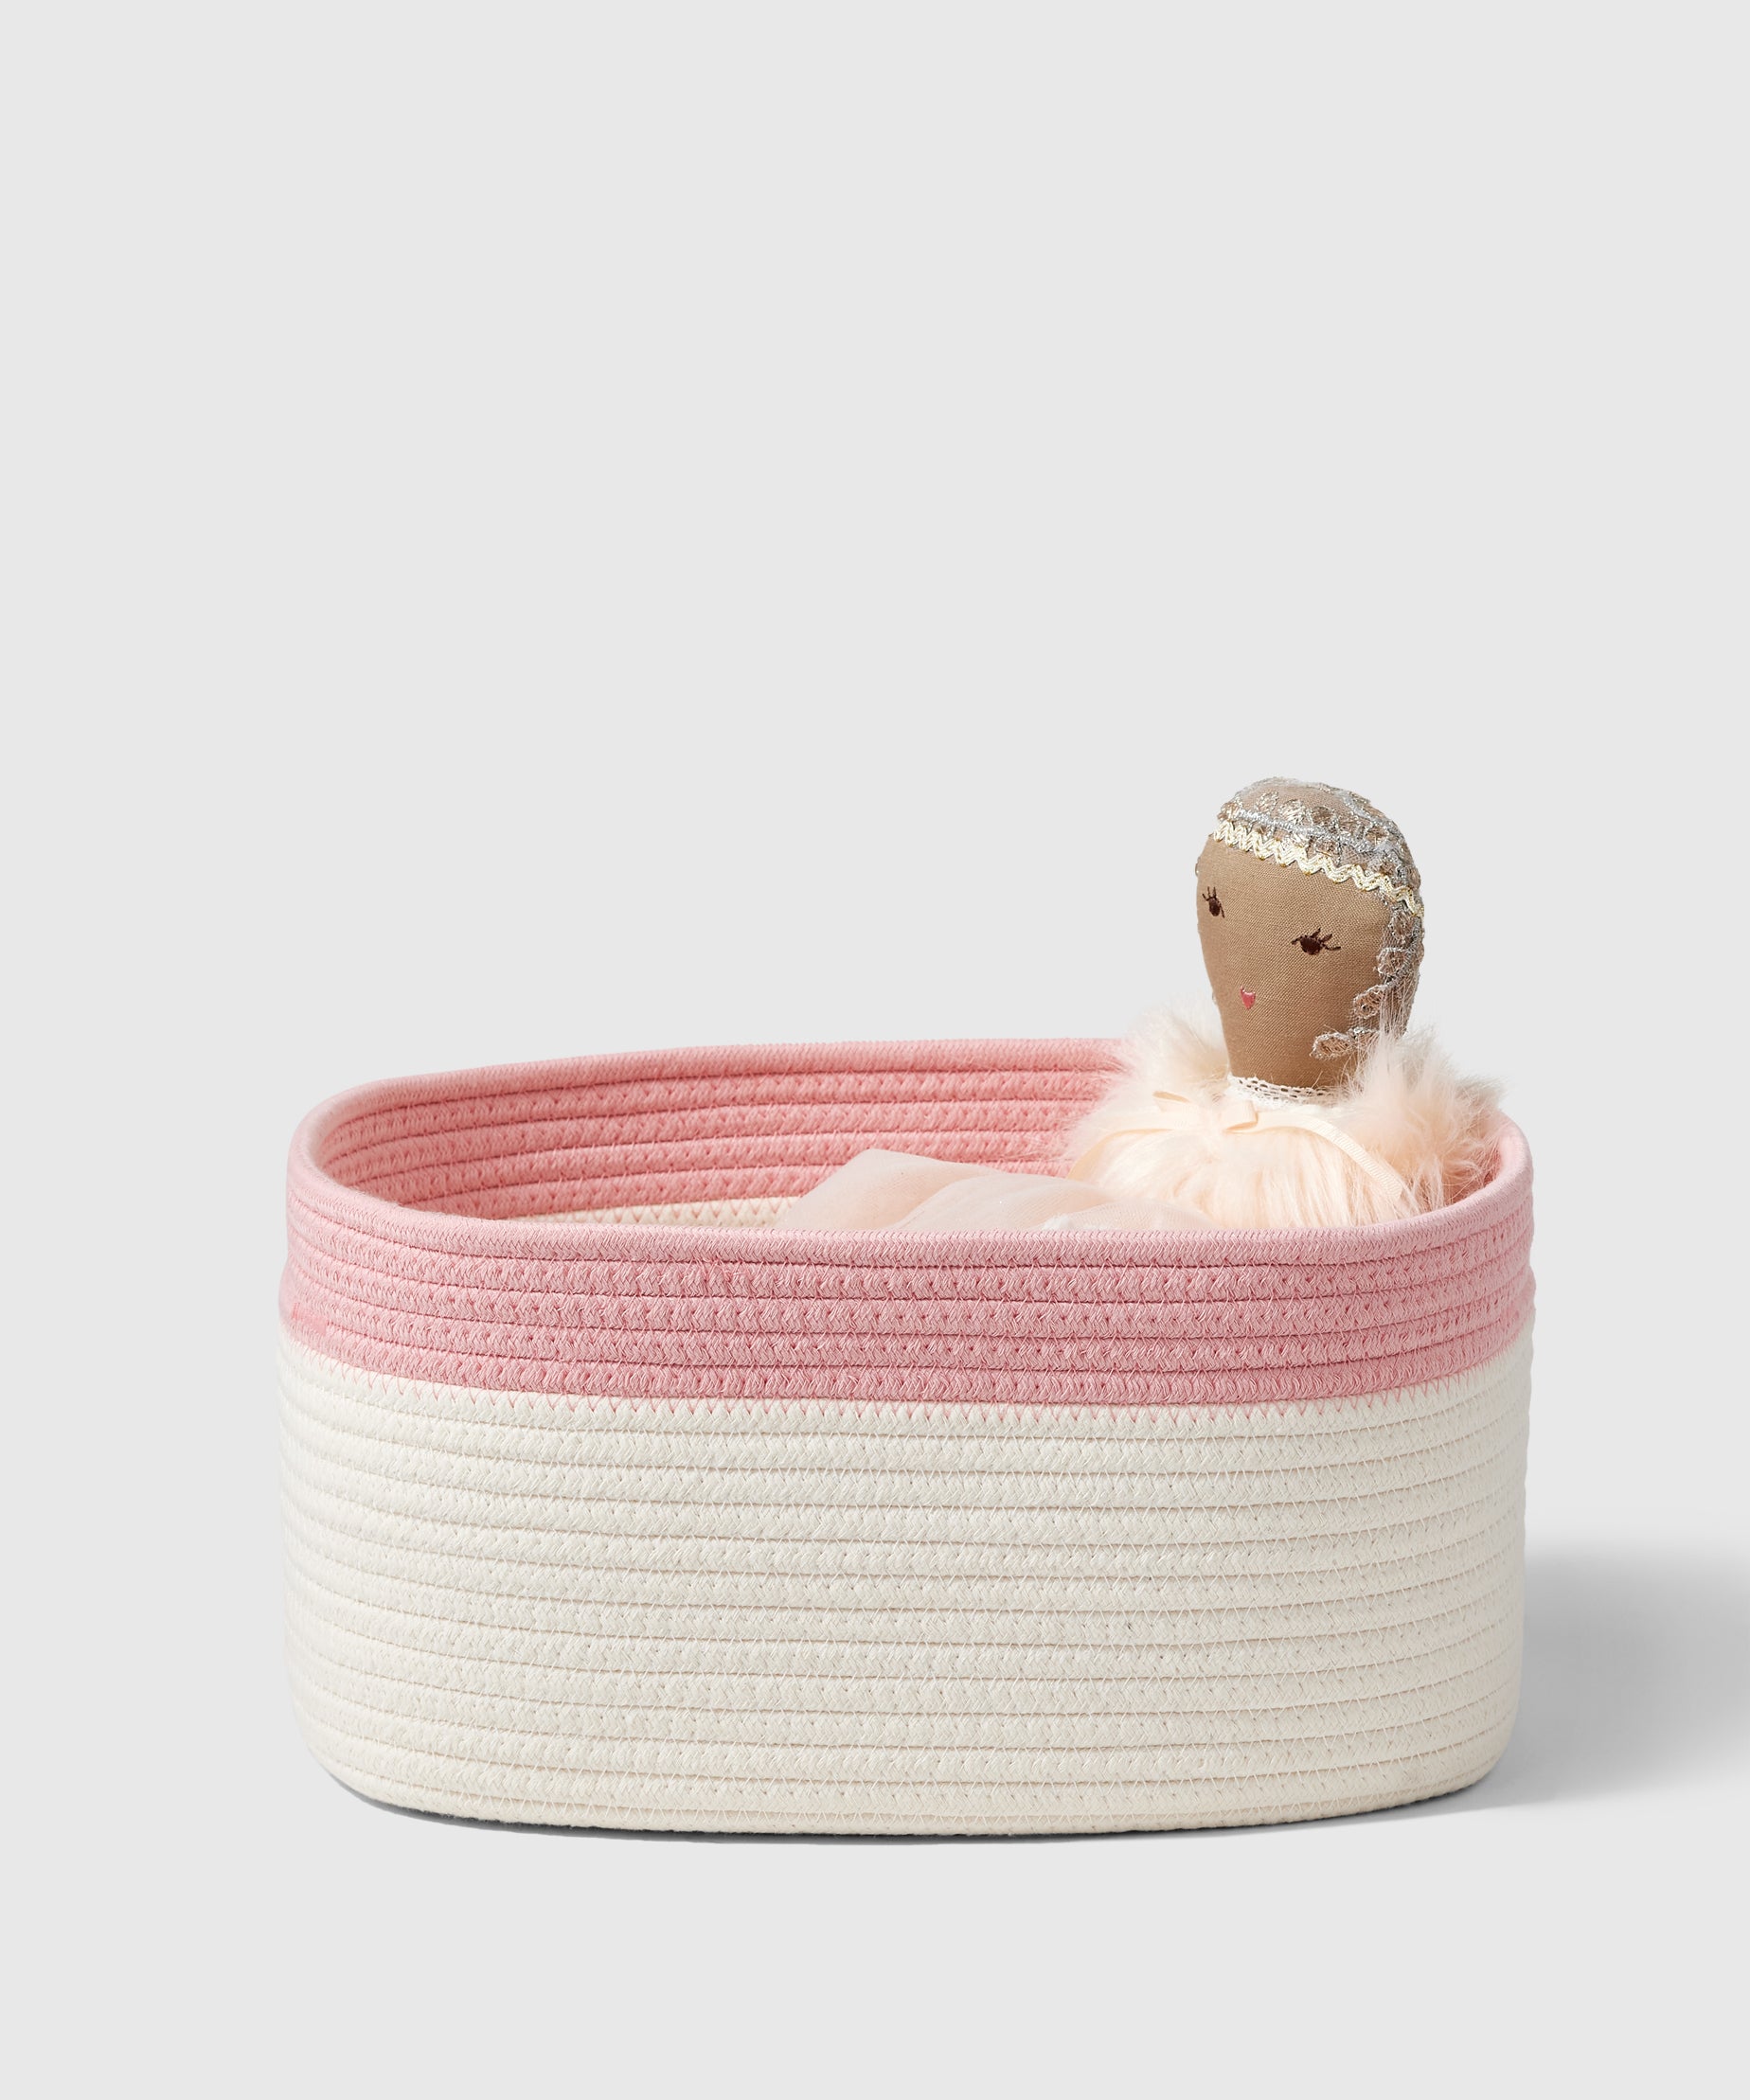 Pink Cotton Rope Storage Basket | The Container Store x KonMari